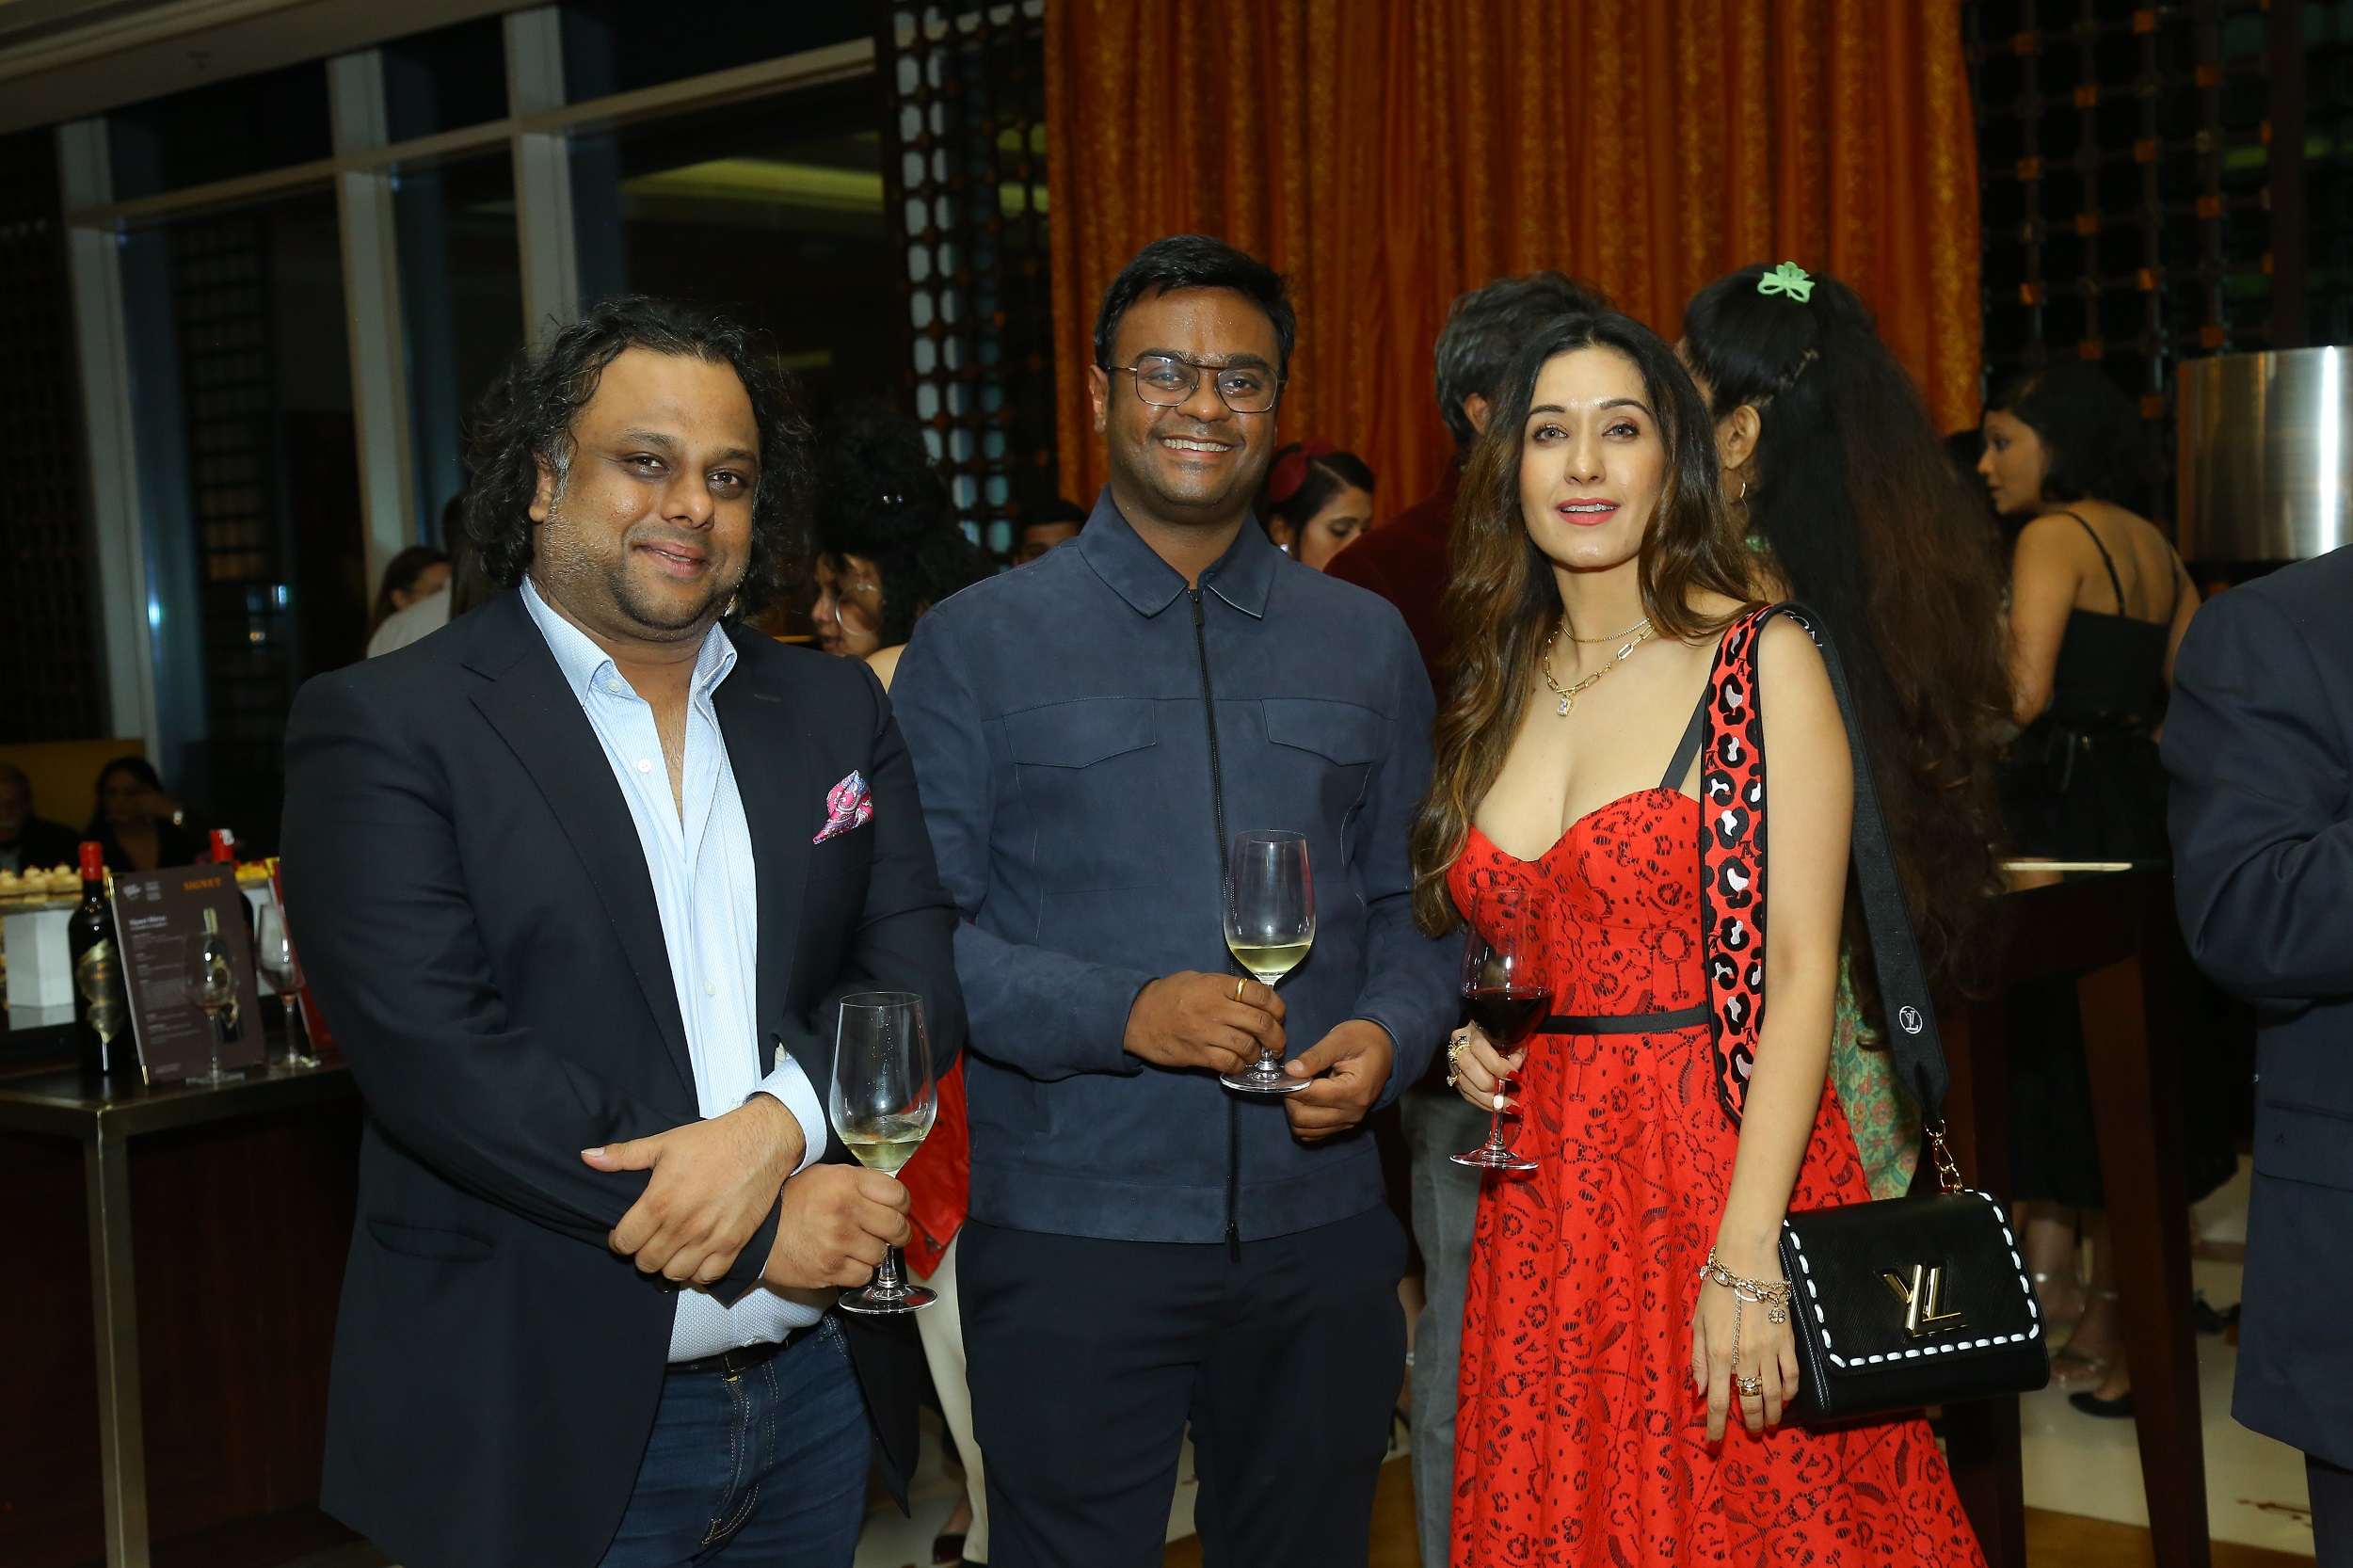 grover-zampa-vineyards-launches-a-reflection-of-their-passion-with-their-signet-collection